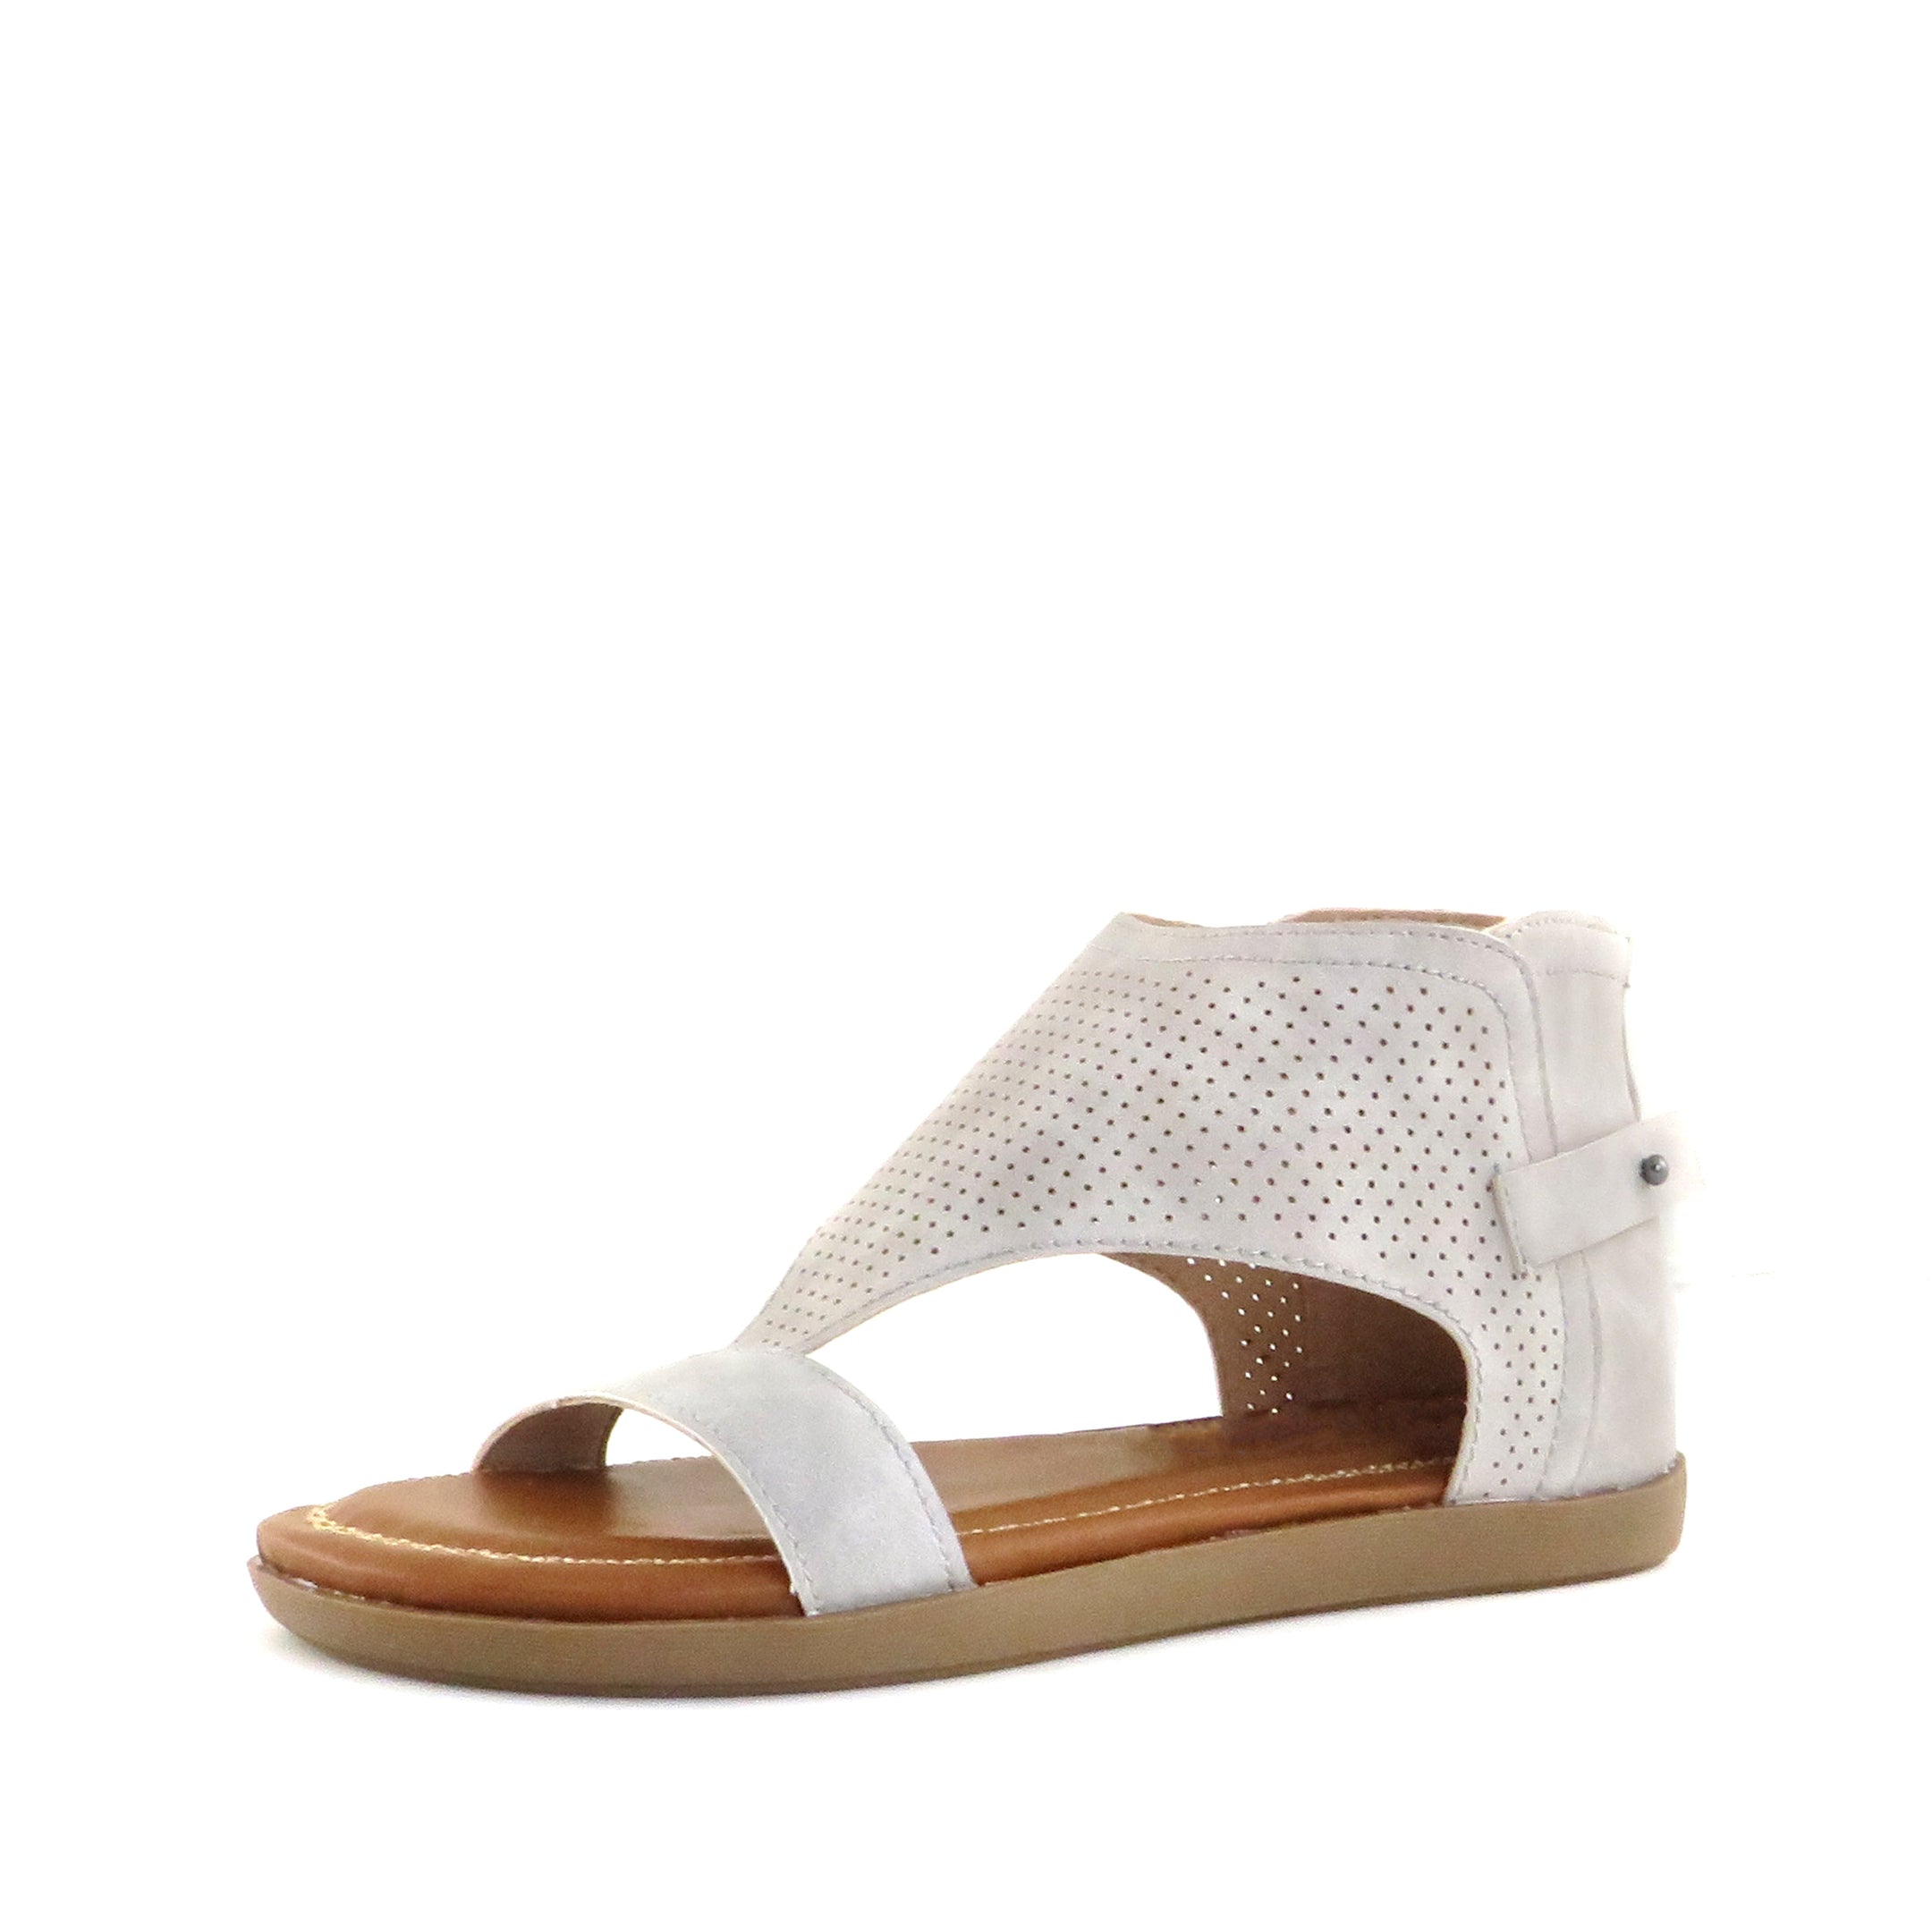 Women's Coop Stone Perforated Sandal